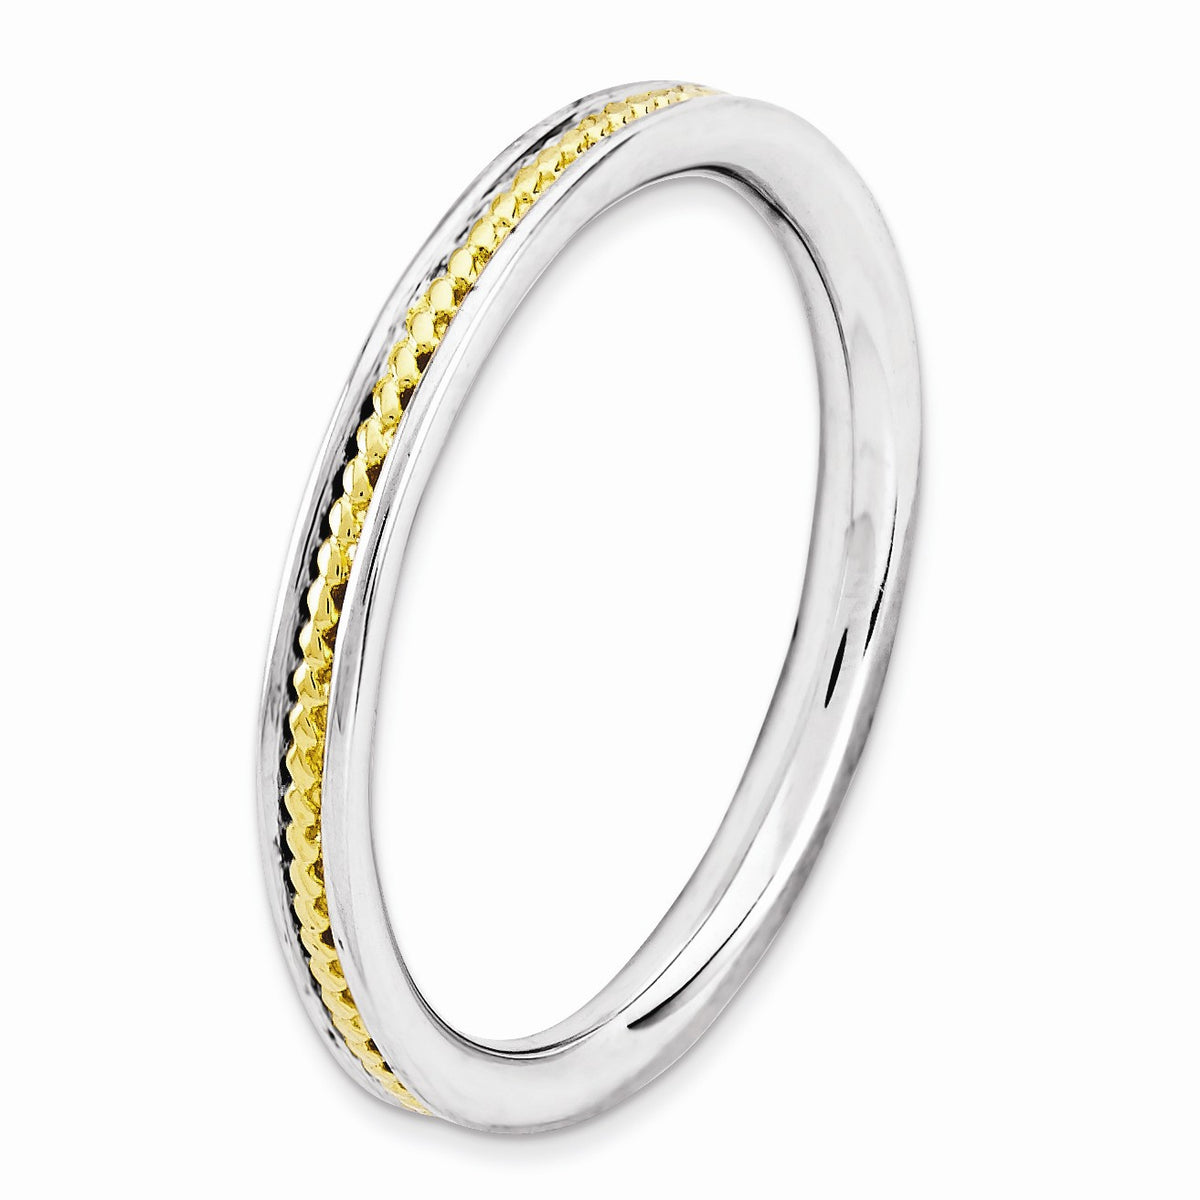 Alternate view of the 2.25mm Sterling Silver Stackable Gold Tone Plated Channeled Band by The Black Bow Jewelry Co.